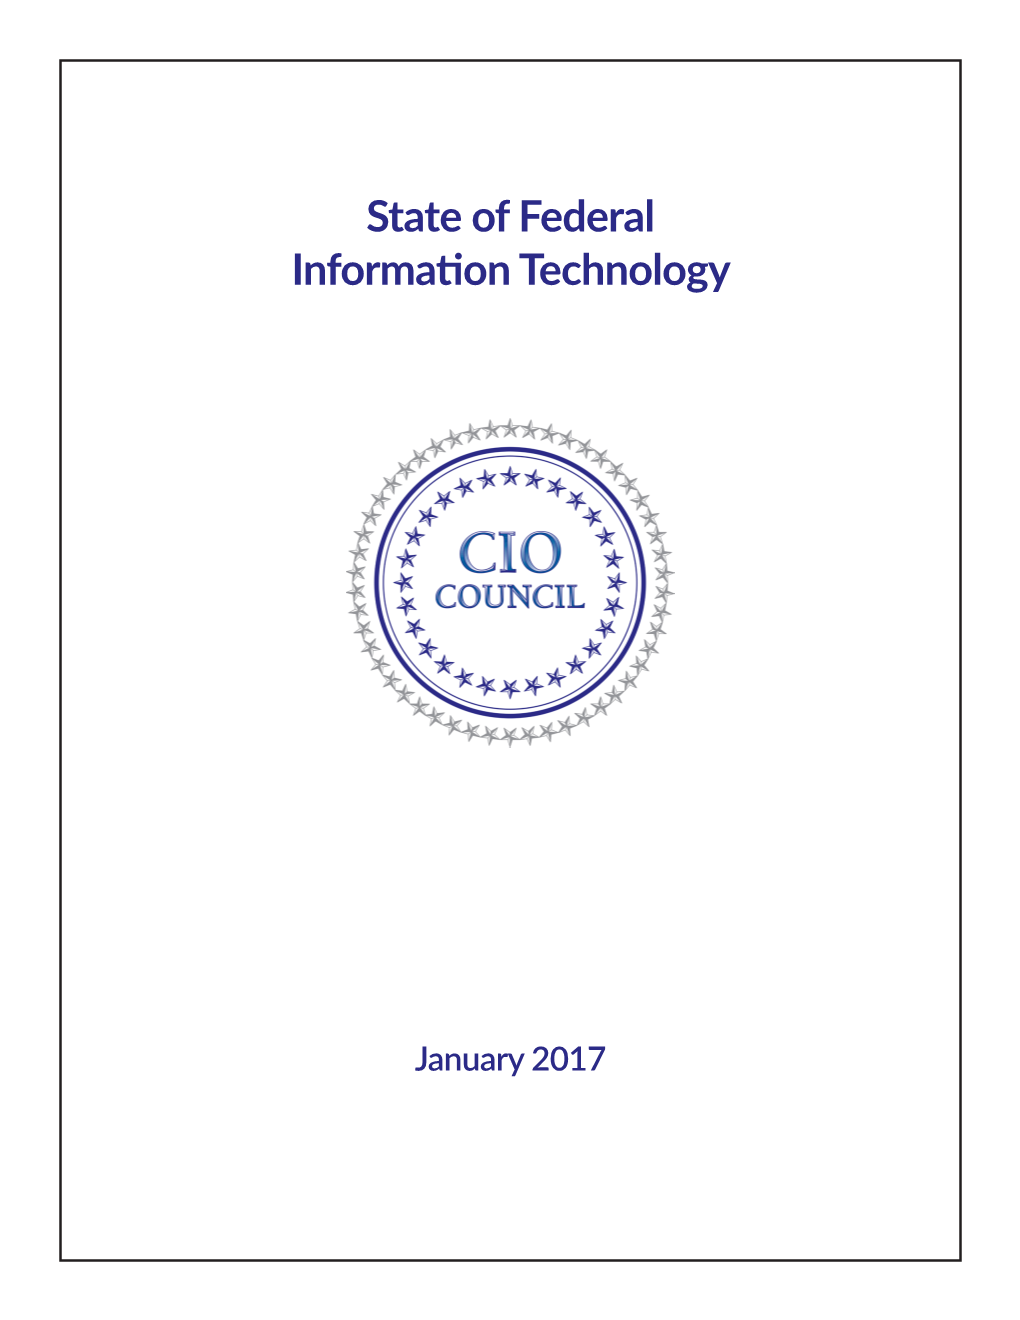 State of Federal Information Technology